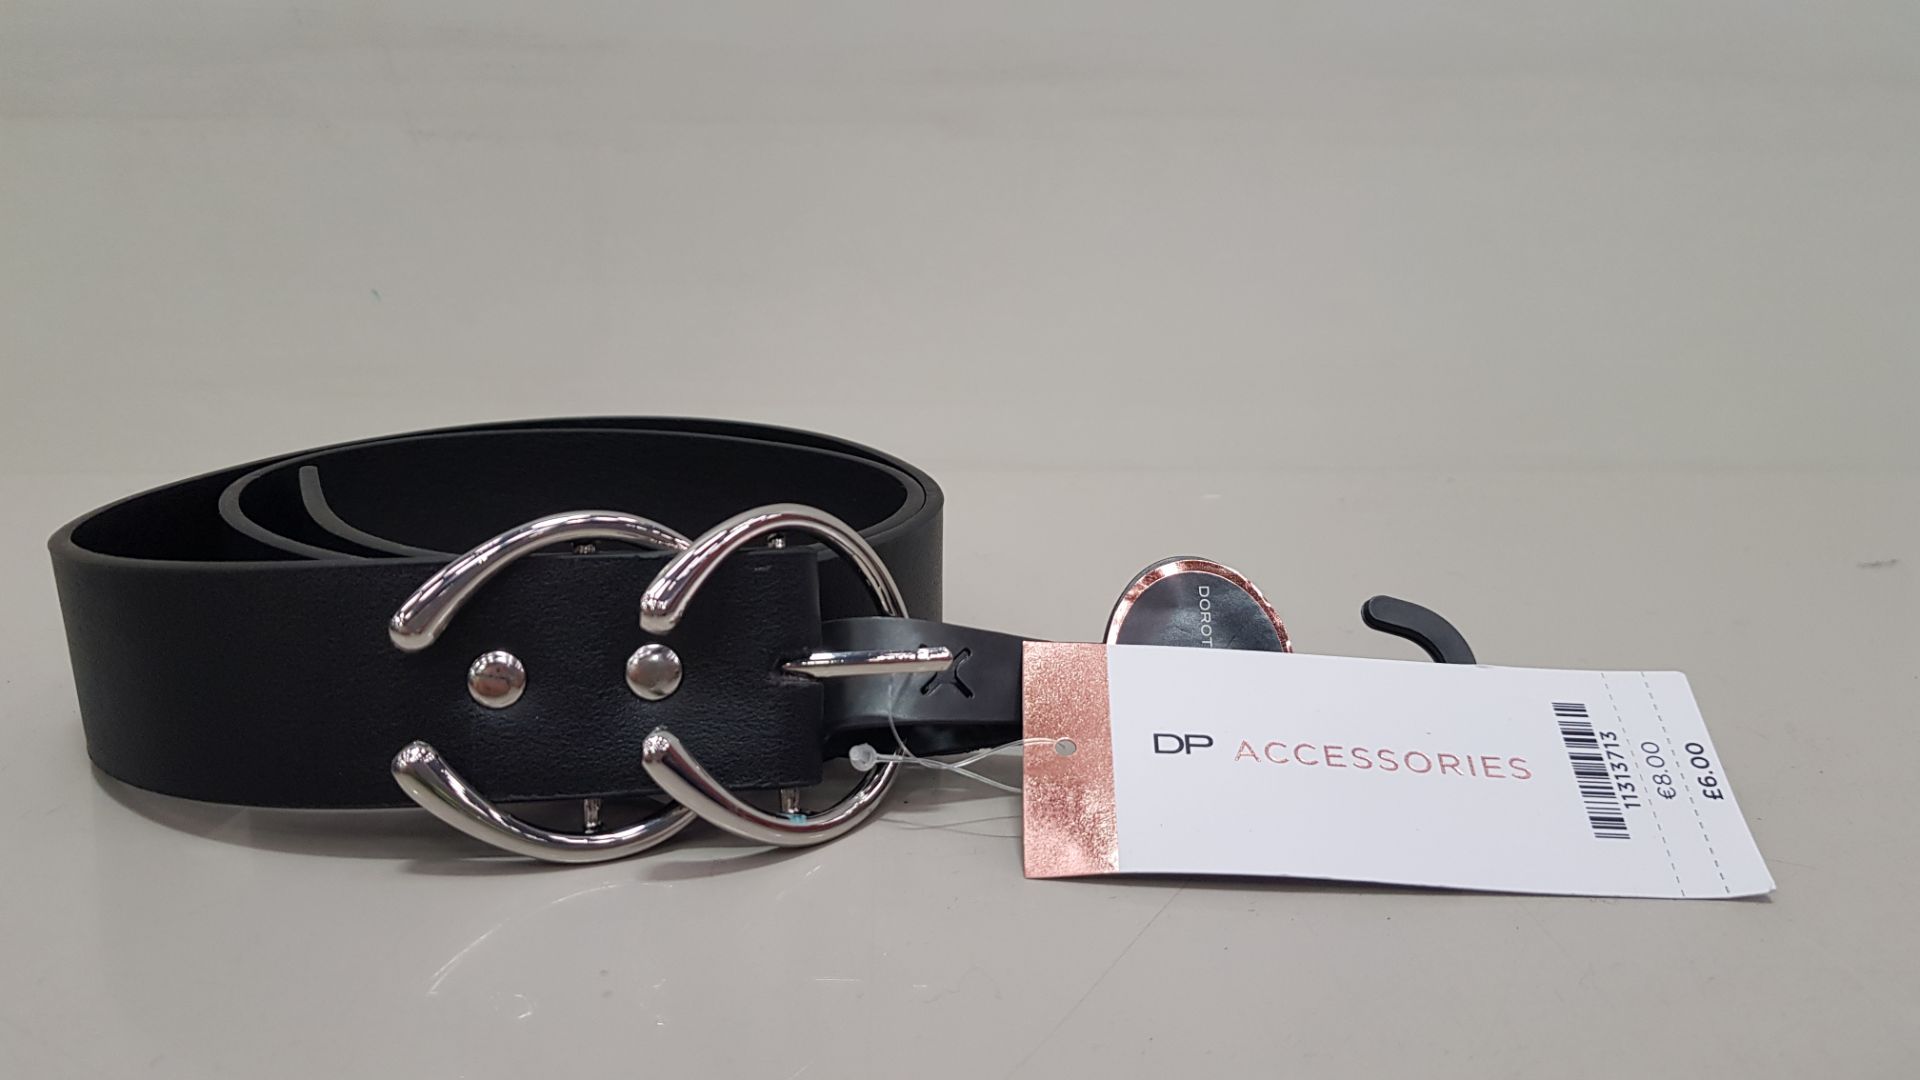 50 X BRAND NEW DOROTHY PERKINS ACCESSORIES BLACK BELTS SIZE LARGE RRP Â£6.00